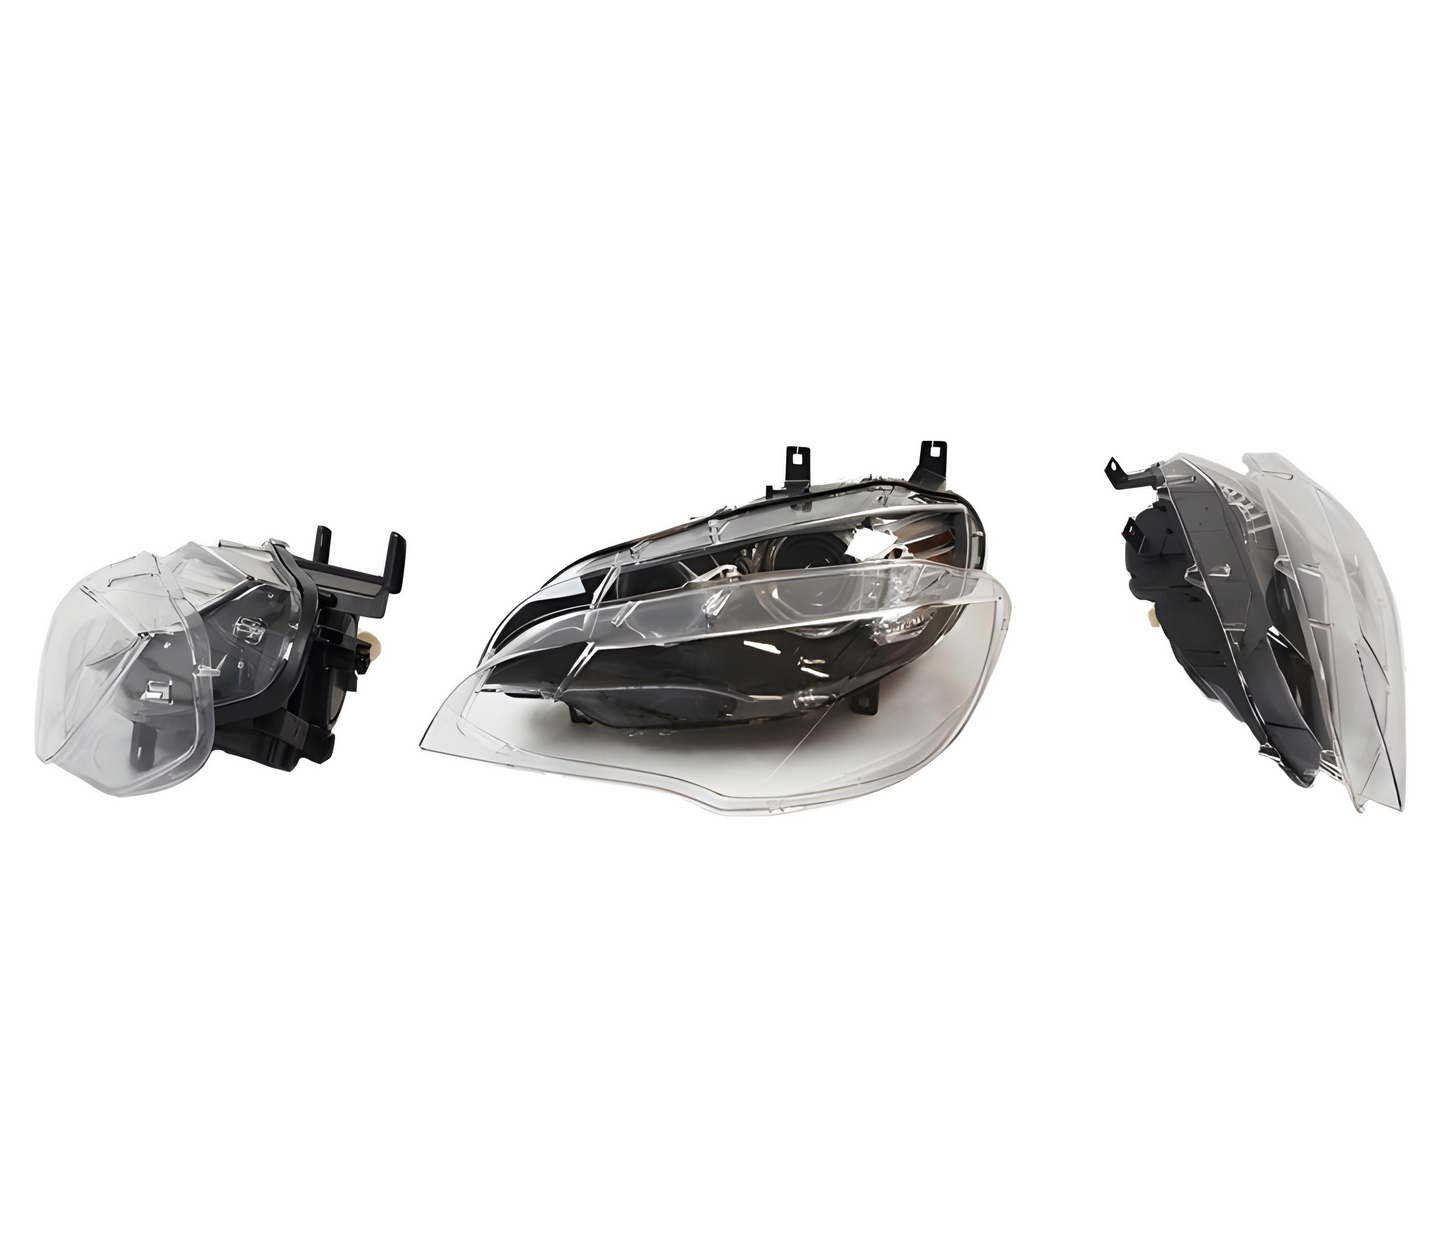 Headlight Lens covers for Mercedes Benz S W221 (2005-2009)